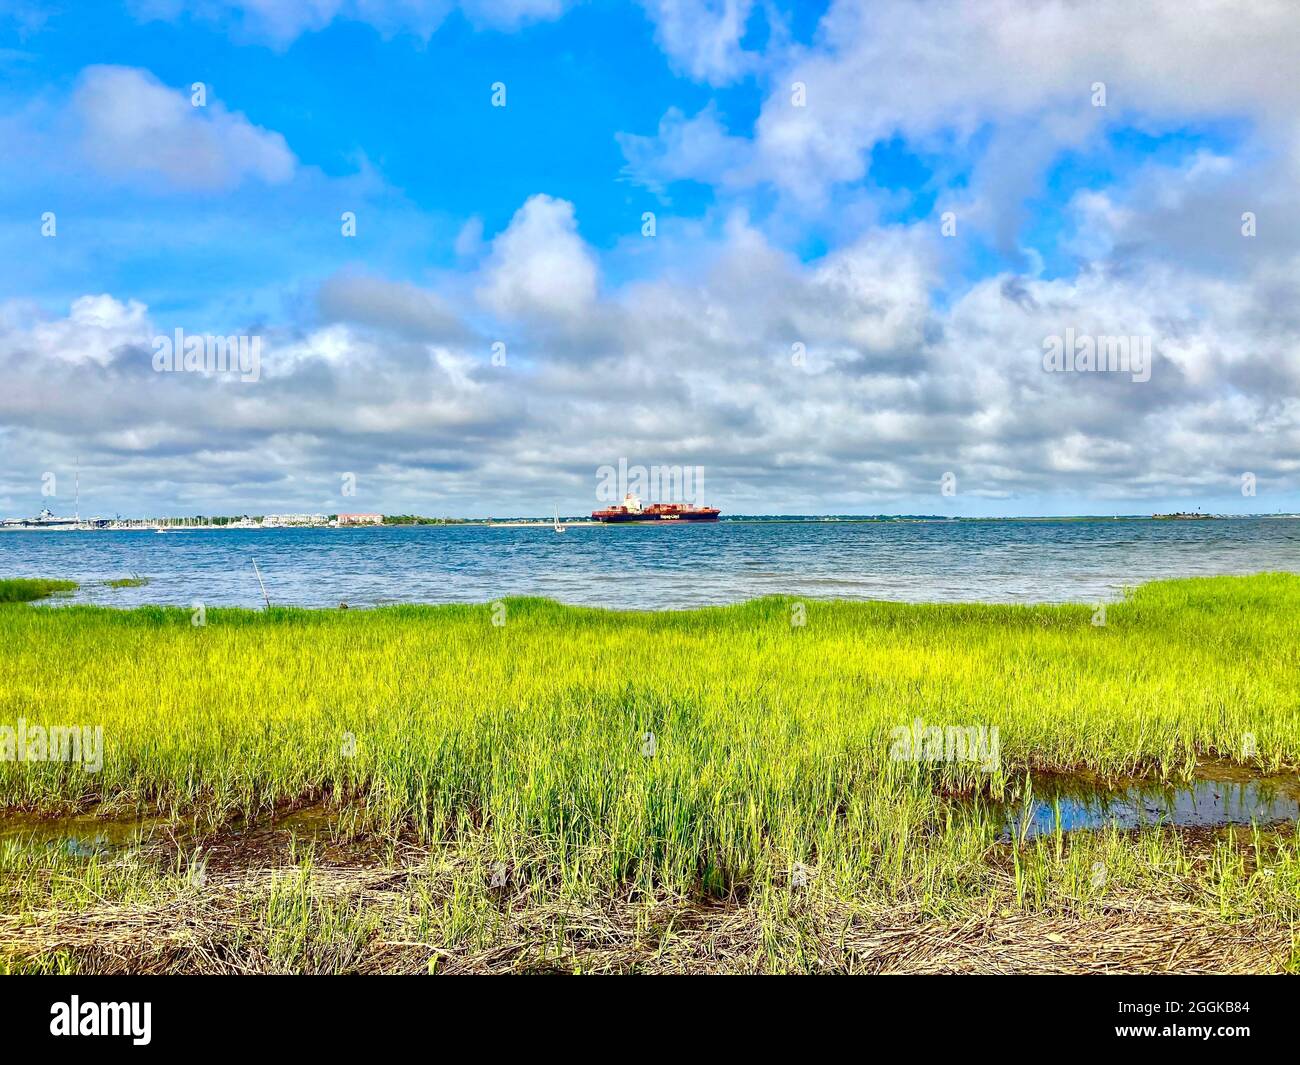 Sea grass, Charleston, South Carolina, with container ship in far middle Stock Photo